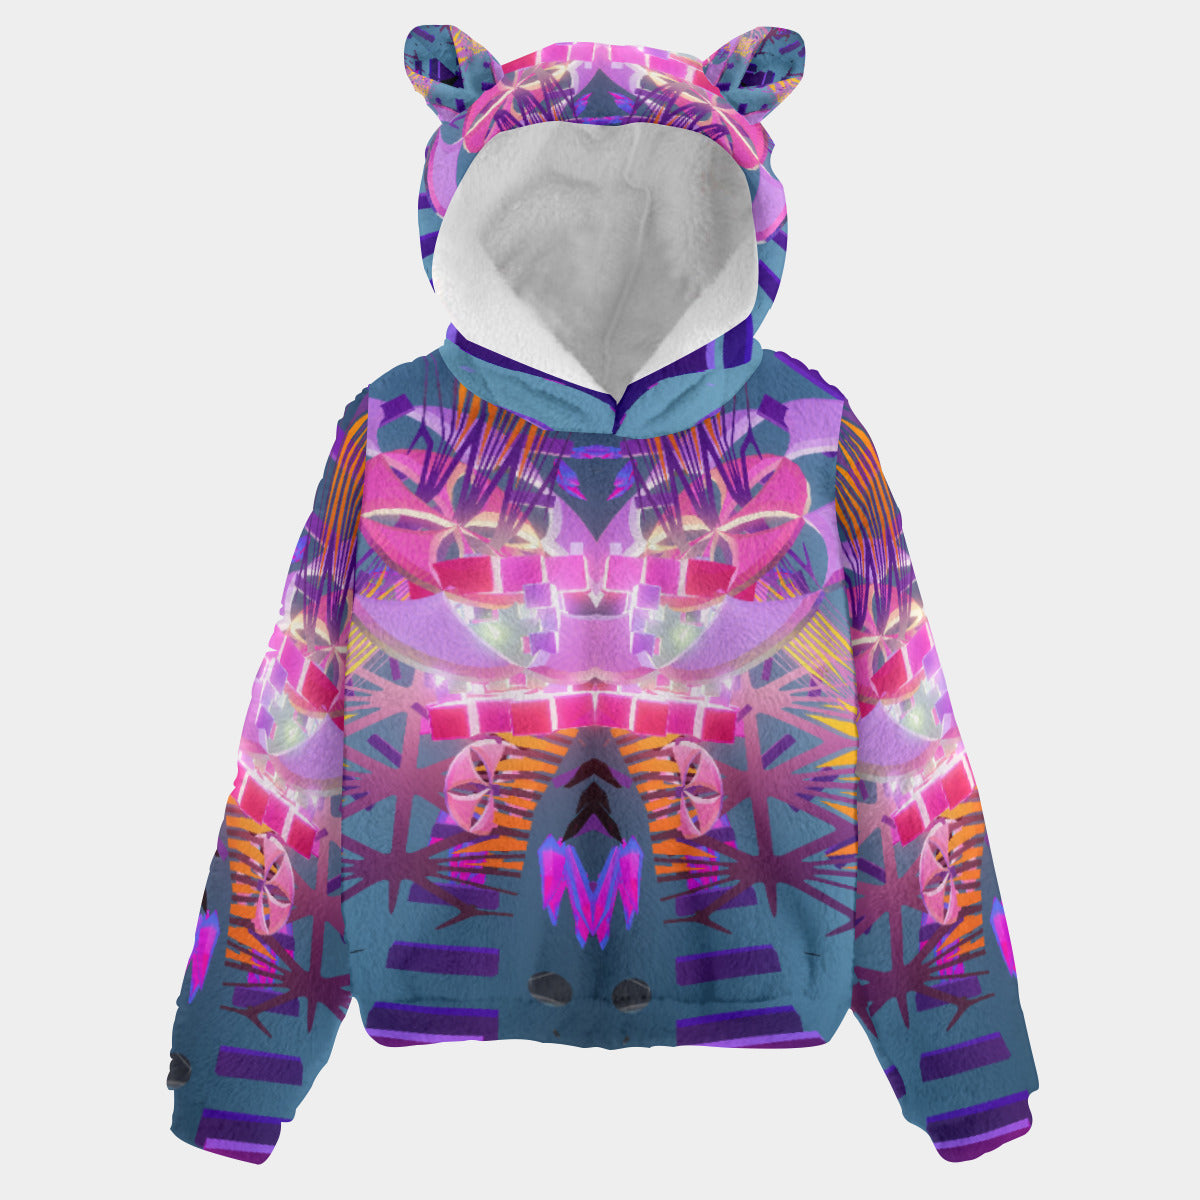 Psychedelic All-Over MicrodoseVR Print Kid’s Borg Fleece Sweatshirt With Ears